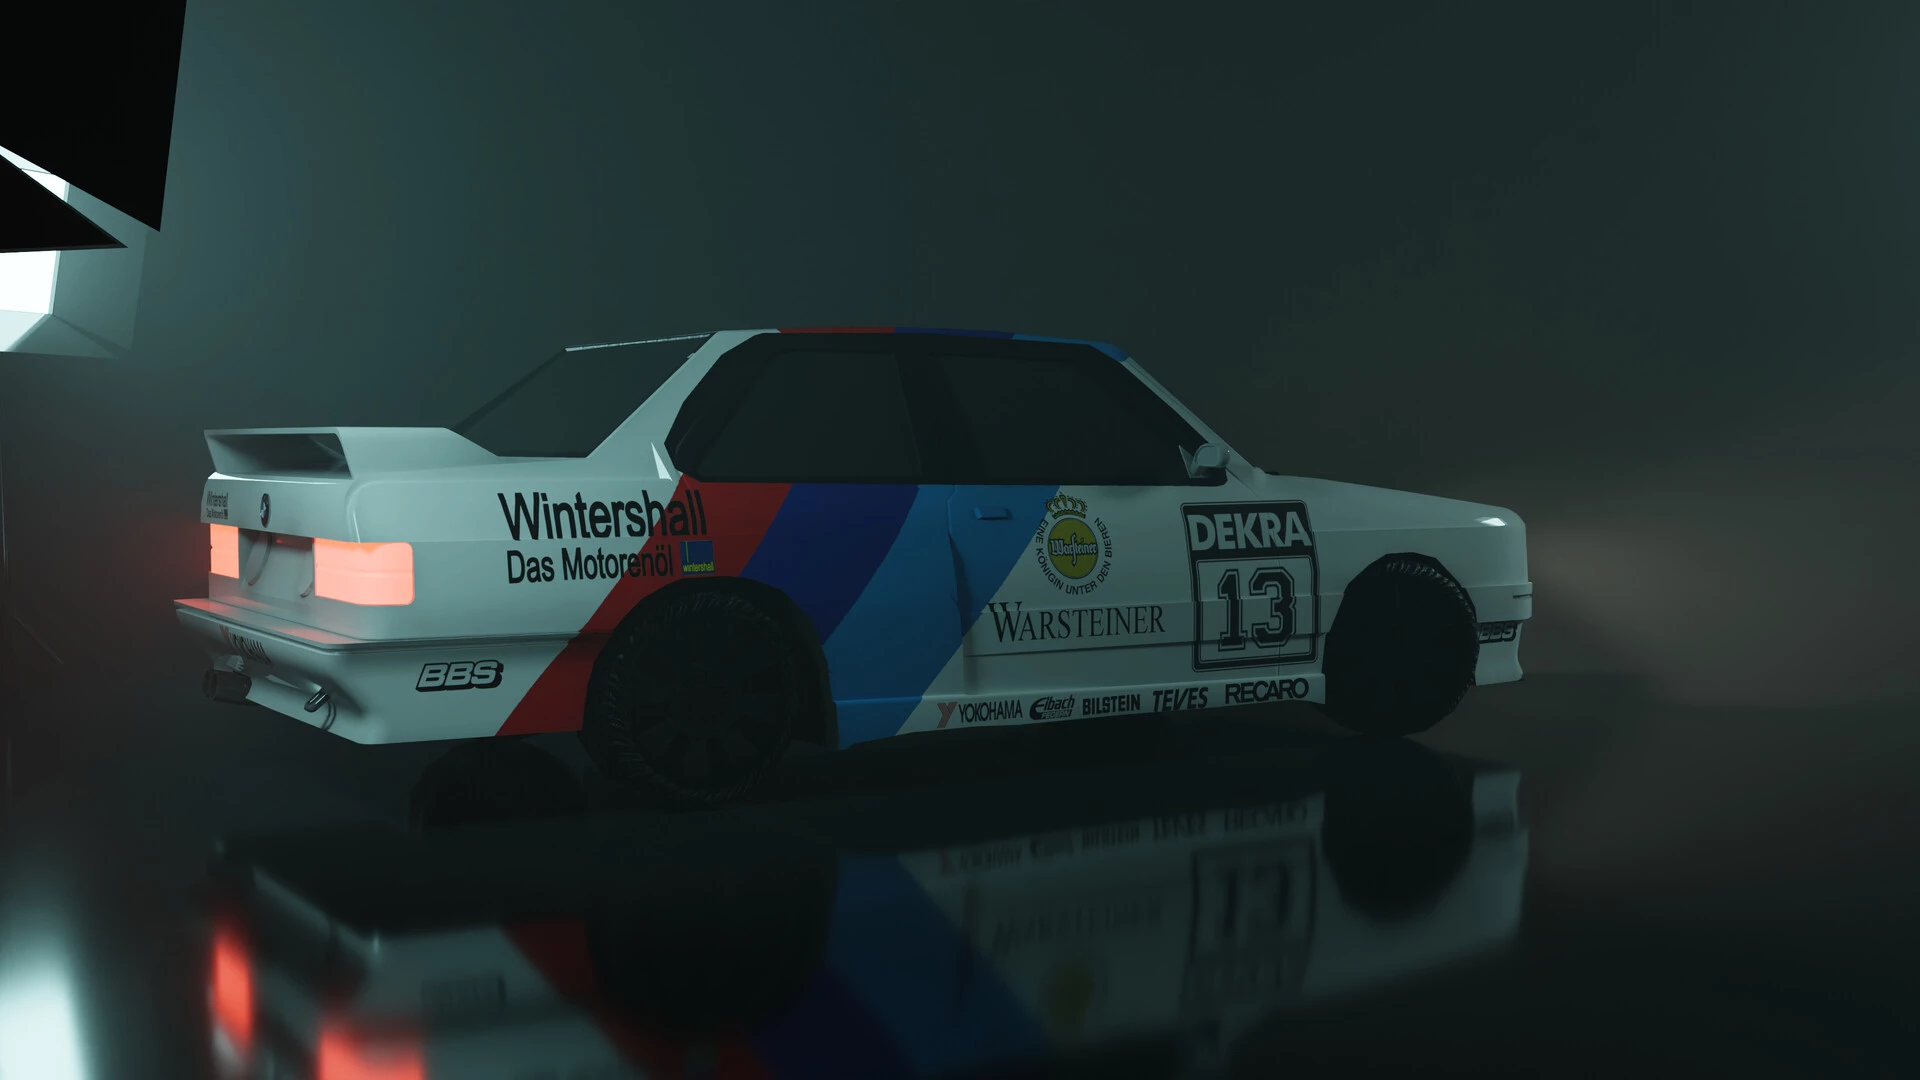 BananaBread - BMW E30 Wintershall: Side view